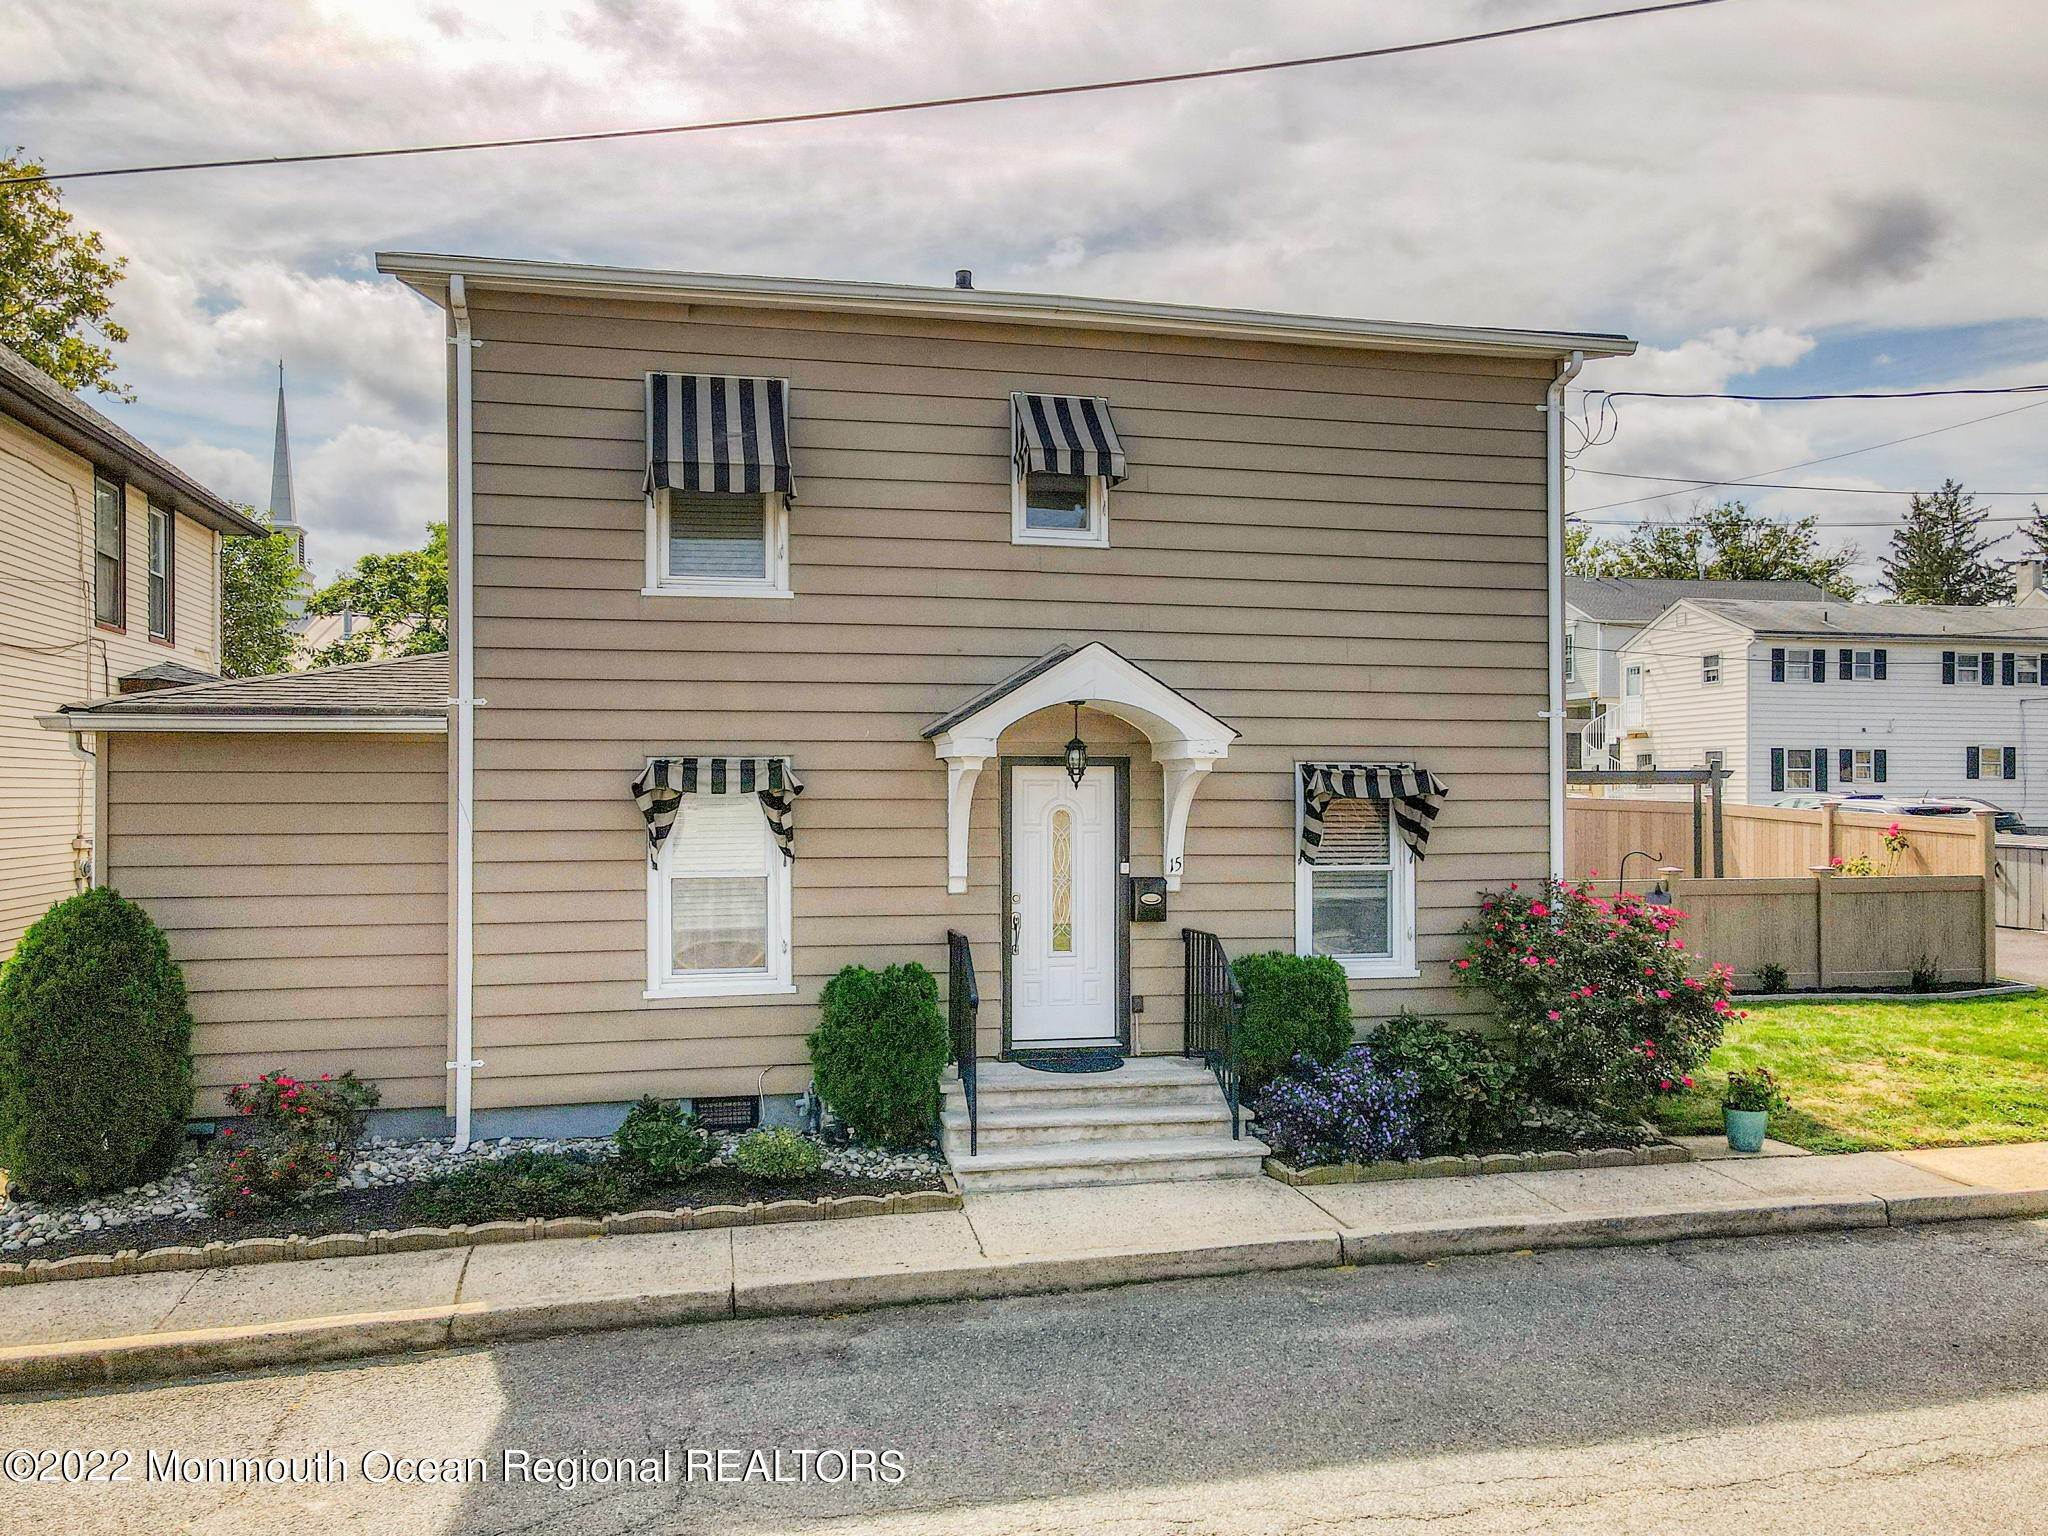 Property for Sale at 15 W 3rd Street Keyport, New Jersey 07735 United States